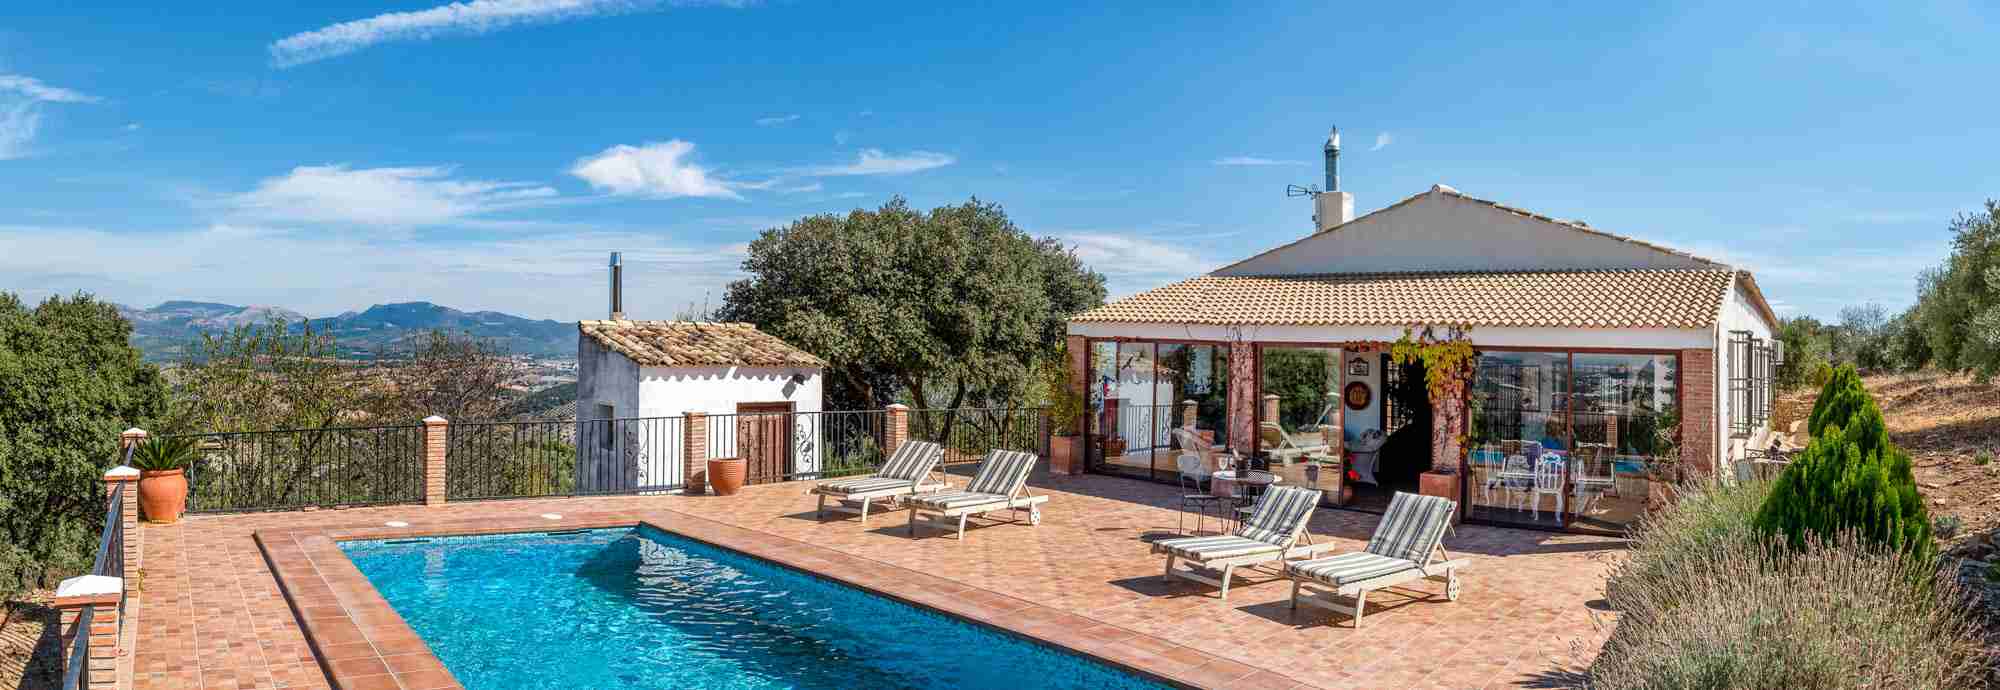 Private villa on one floor surrounded by glorious Andalusian landscape